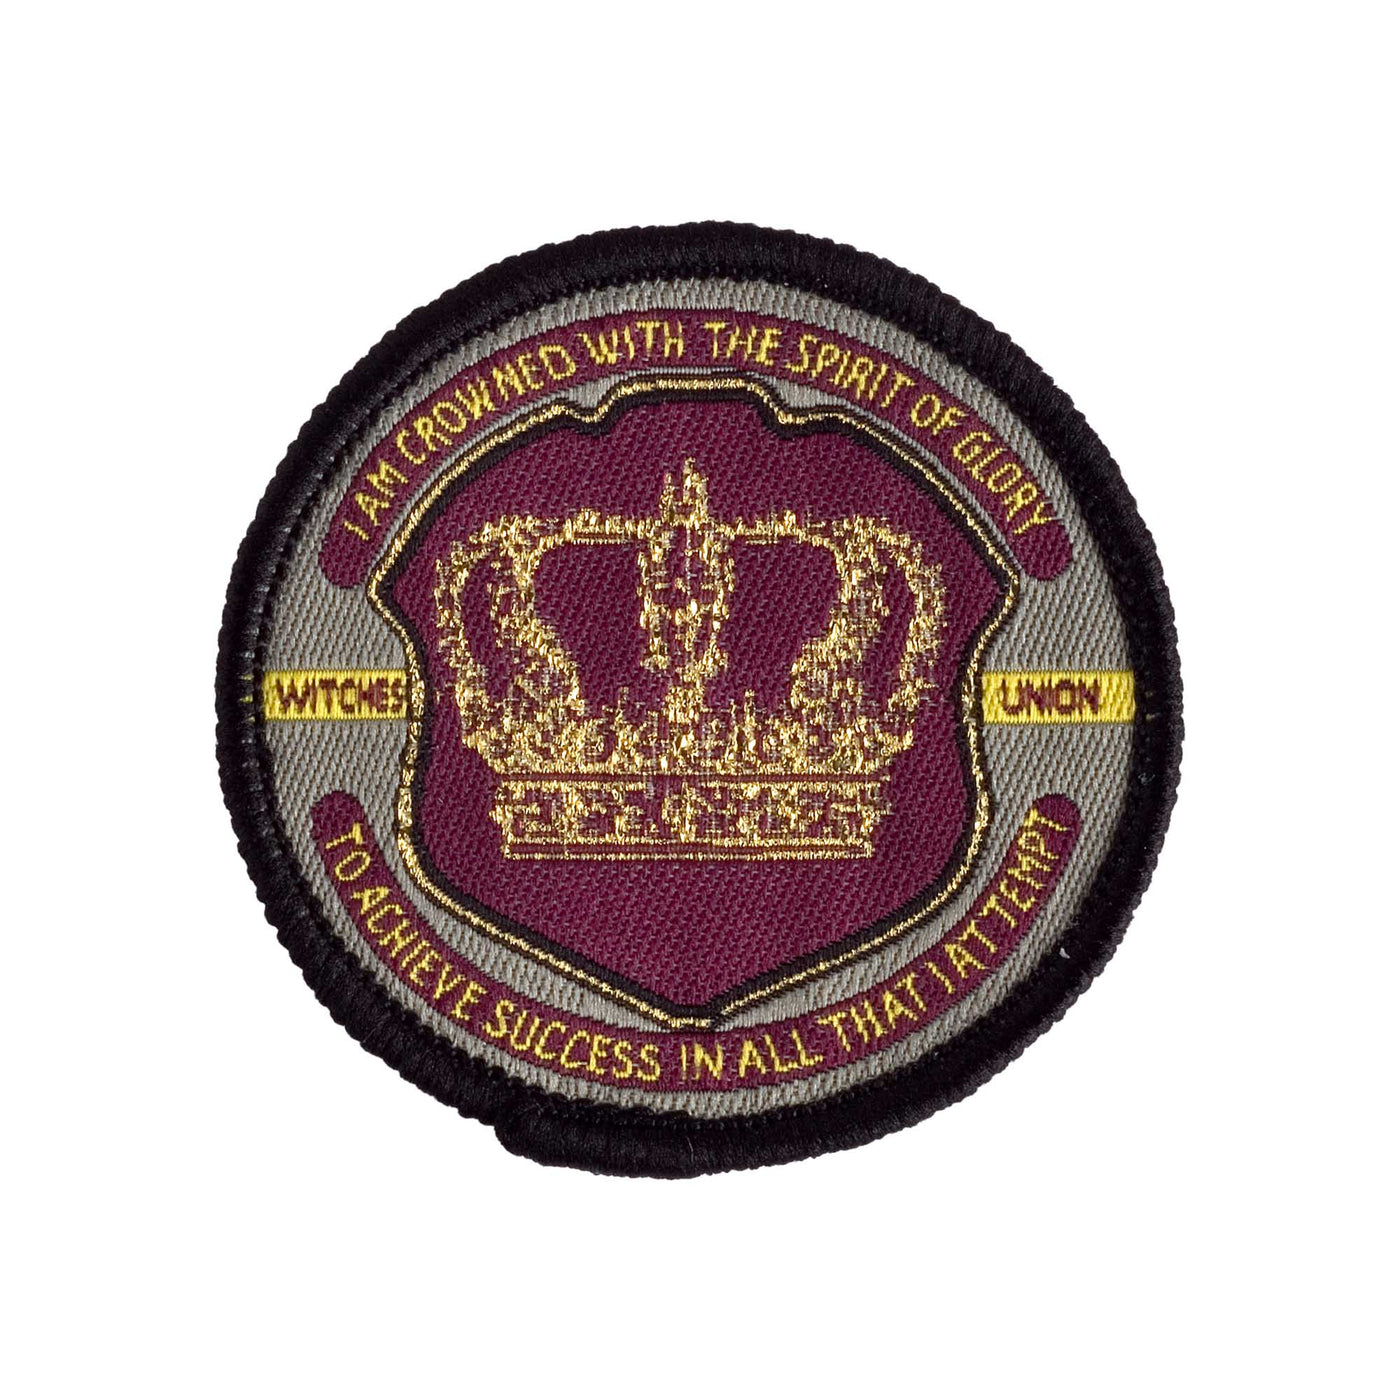 Coventry Creations Witches Union- Magical Adept Crown of Success Patch 